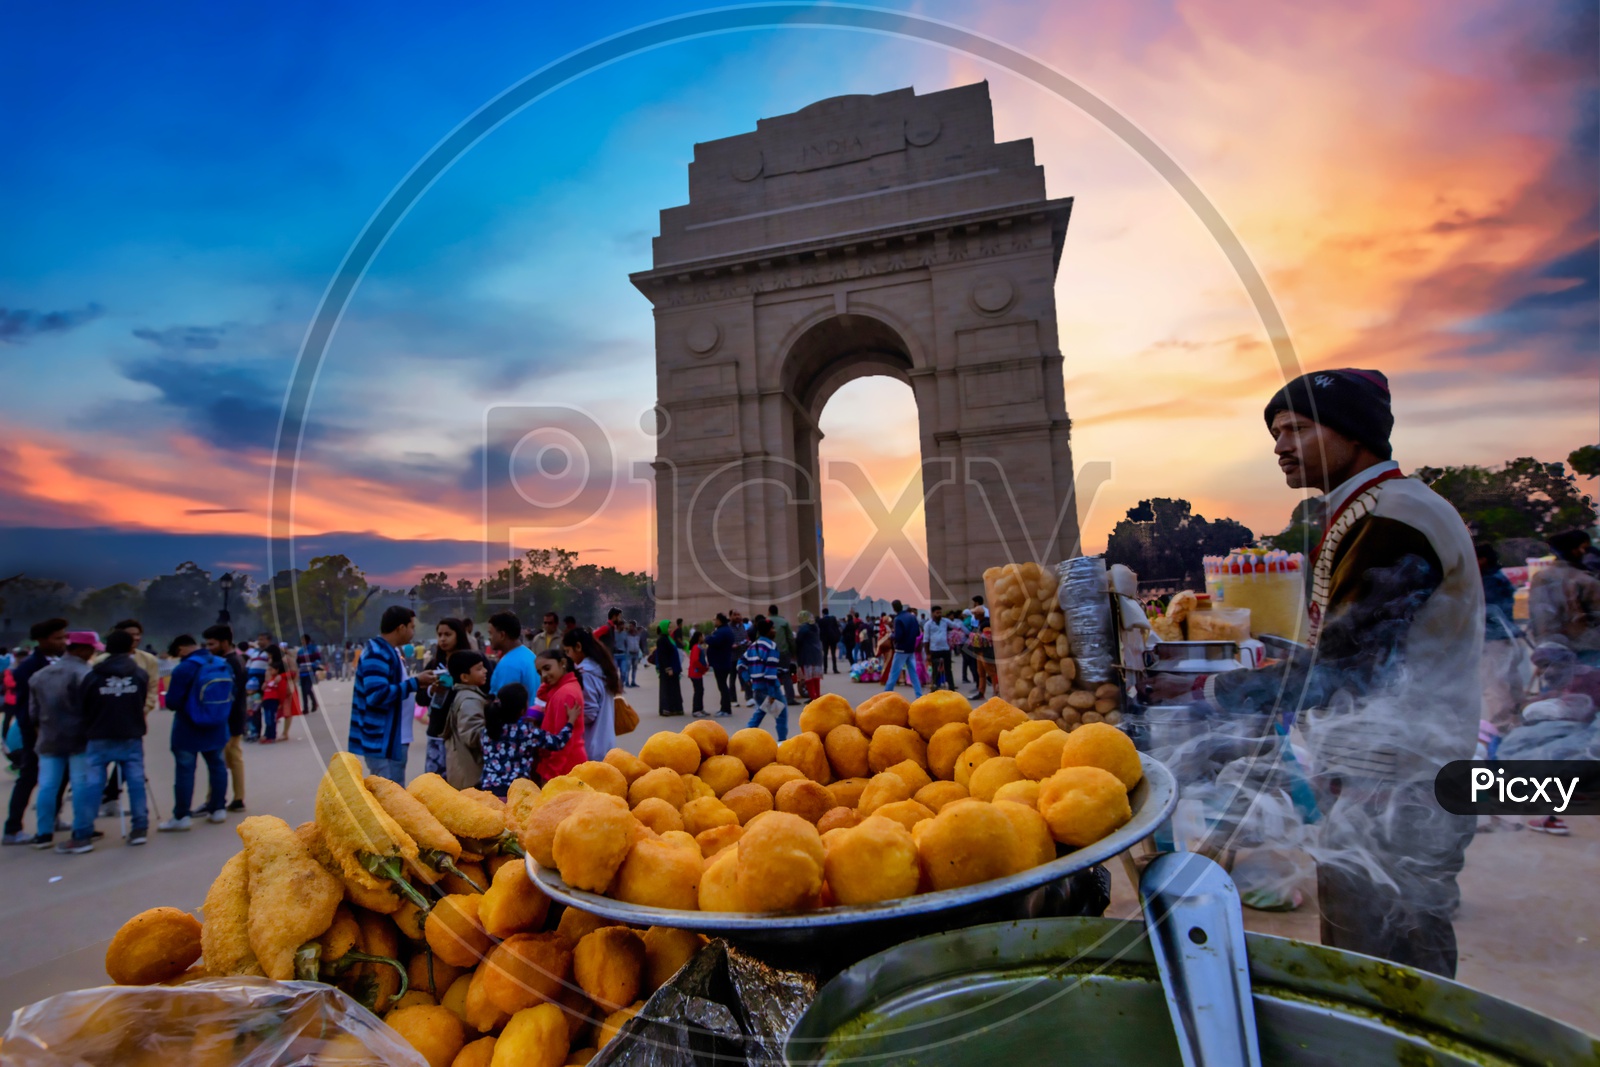 Street vendors selling street food at india gate during sunset dusk hours